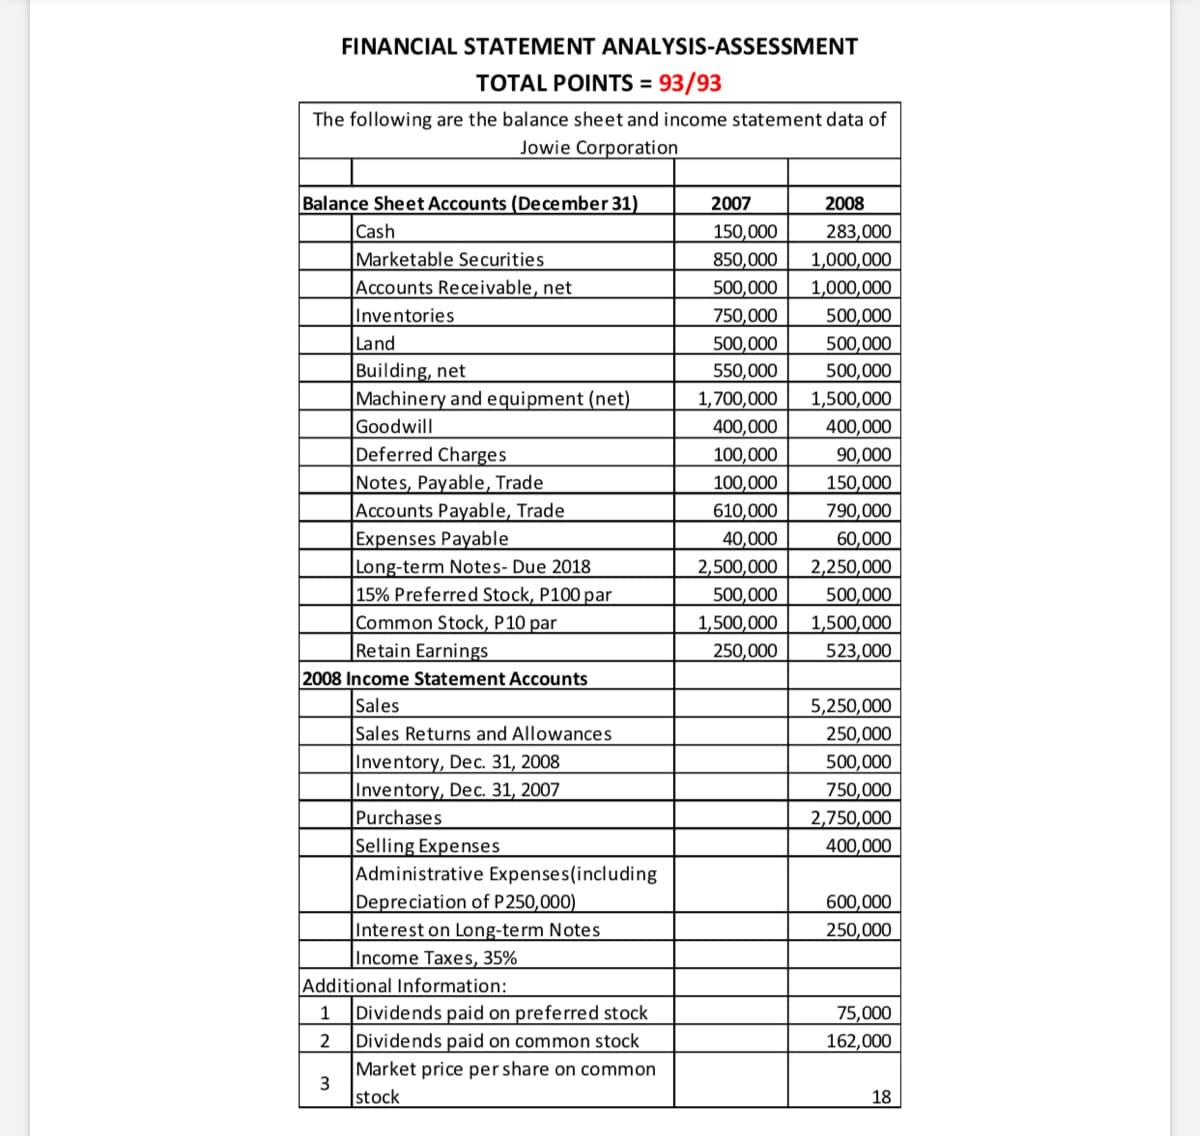 FINANCIAL STATEMENT ANALYSIS-ASSESSMENT
TOTAL POINTS = 93/93
The following are the balance sheet and income statement data of
Jowie Corporation
Balance Sheet Accounts (De cember 31)
2007
2008
Cash
283,000
1,000,000
150,000
Marketable Securities
Accounts Receivable, net
850,000
500,000
1,000,000
500,000
Inventories
Land
750,000
500,000
500,000
Building, net
Machinery and equipment (net)
Goodwill
|Deferred Charges
Notes, Payable, Trade
Accounts Payable, Trade
Expenses Payable
Long-term Notes- Due 2018
15% Preferred Stock, P100 par
Common Stock, P10 par
Retain Earnings
2008 Income Statement Accounts
Sales
550,000
500,000
1,700,000
1,500,000
400,000
400,000
100,000
100,000
610,000
40,000
90,000
150,000
790,000
60,000
2,500,000
2,250,000
500,000
500,000
1,500,000
1,500,000
250,000
523,000
5,250,000
250,000
Sales Returns and Allowances
Inventory, Dec. 31, 2008
Inventory, Dec. 31, 2007
Purchases
Selling Expenses
Administrative Expenses(including
Depreciation of P250,000)
Interest on Long-term Notes
Income Taxes, 35%
Additional Information:
Dividends paid on preferred stock
Dividends paid on common stock
500,000
750,000
2,750,000
400,000
600,000
250,000
1
75,000
2
162,000
Market price per share on common
3
stock
18
